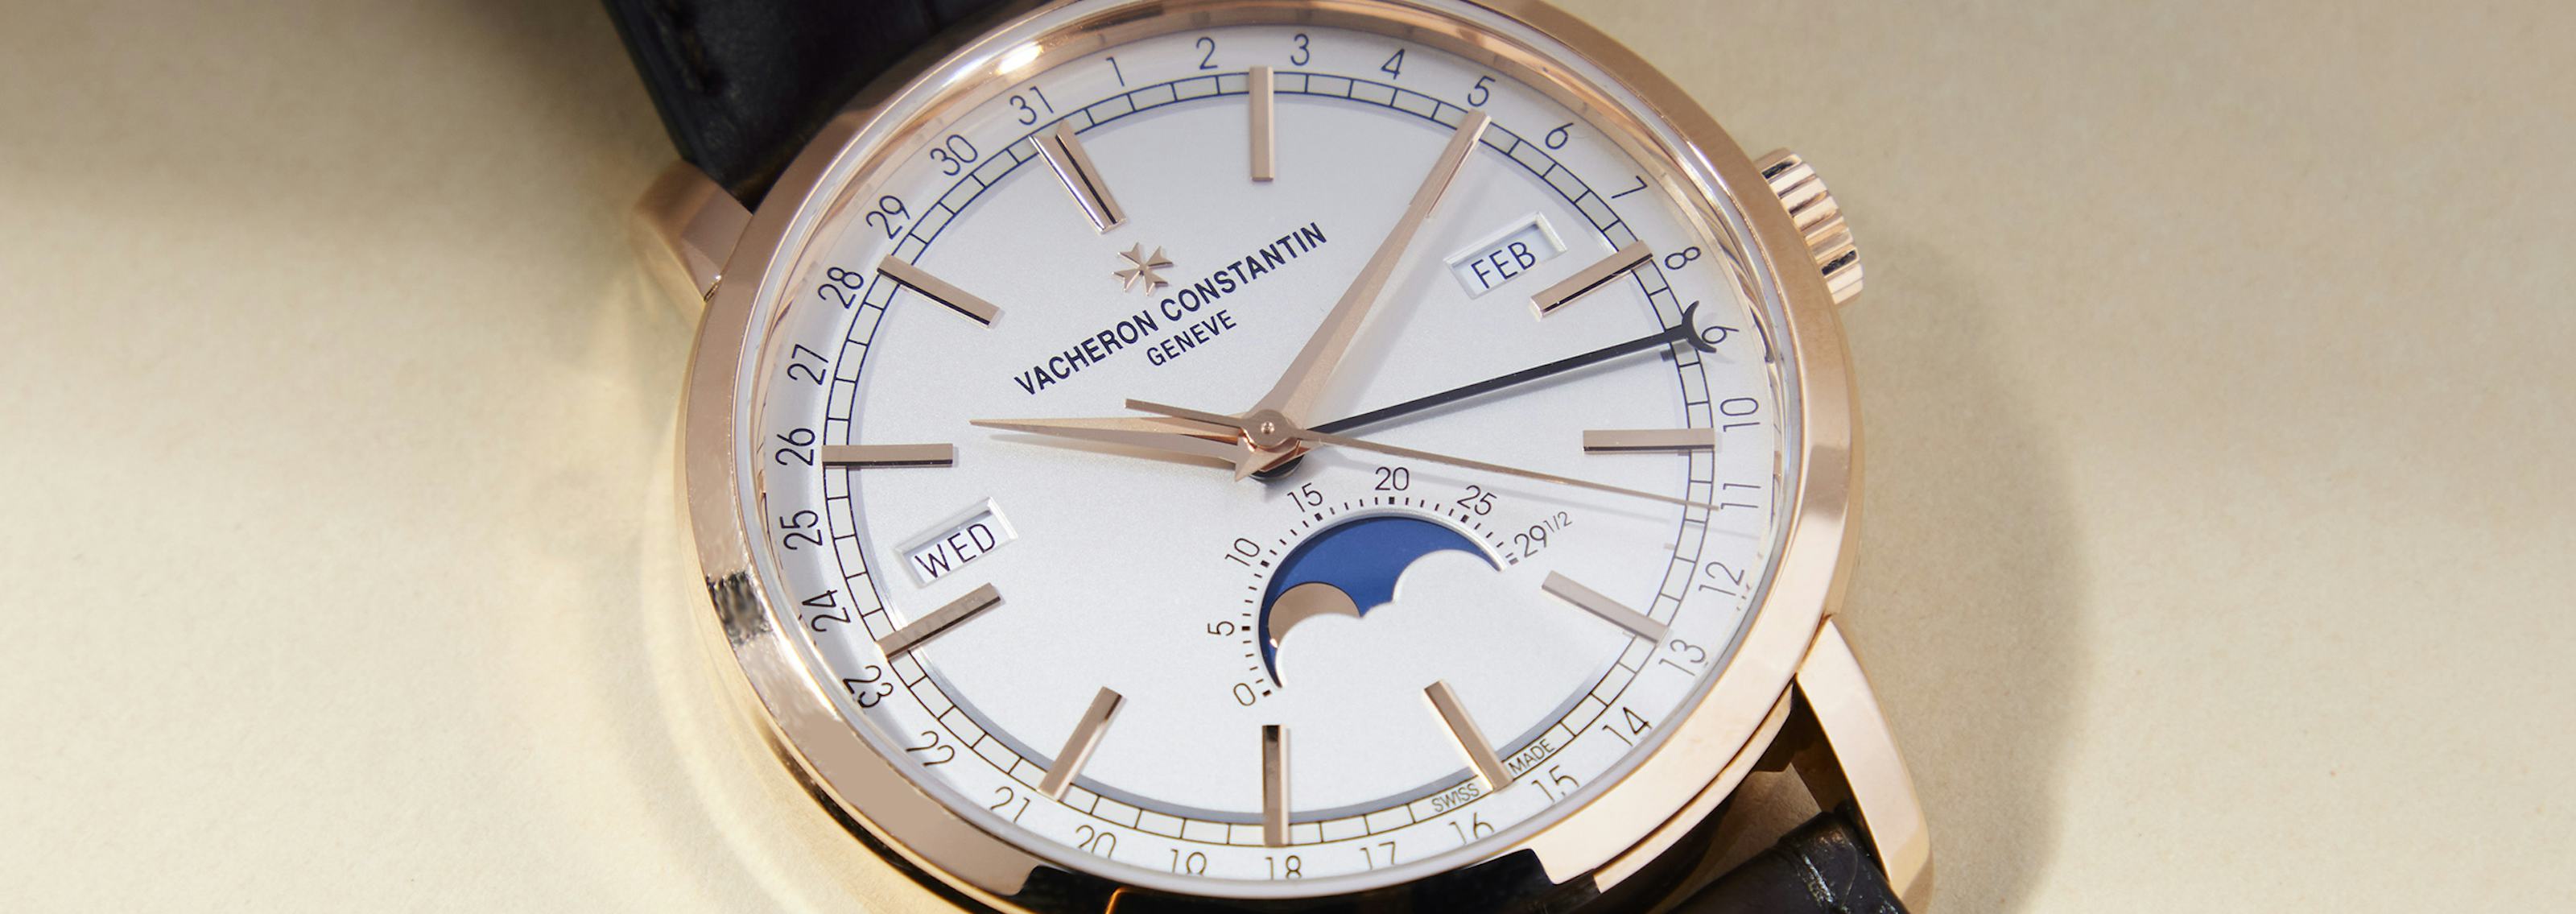 The Vacheron Constantin Traditionnelle Complete Calendar With Moonphase